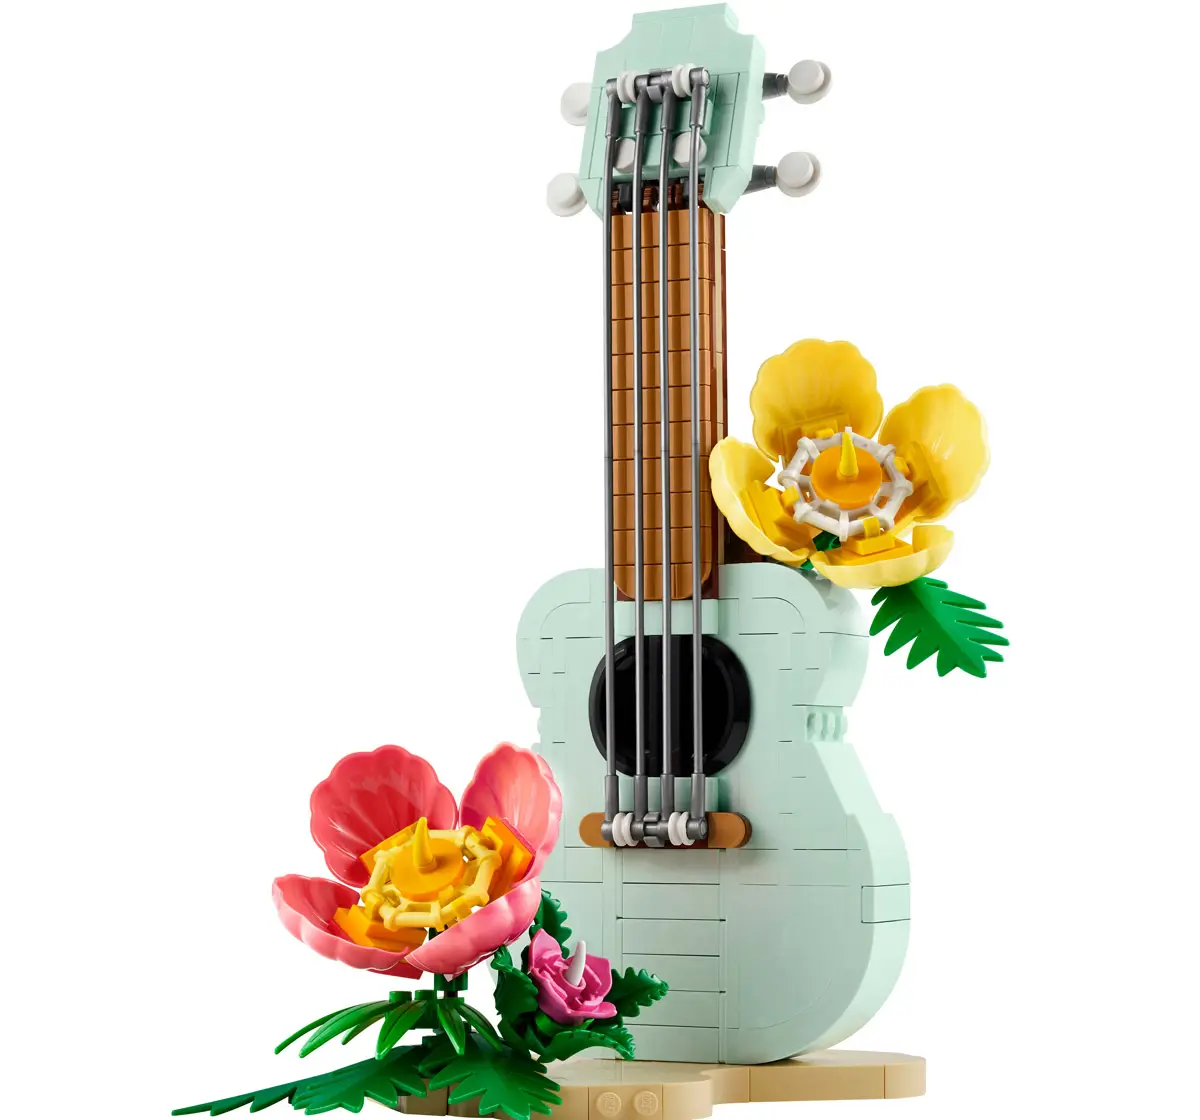 Lego Creator Tropical Ukulele 3 In 1 Toy Set 31156 Multicolour For Kids Ages 8Y+ (387 Pieces)